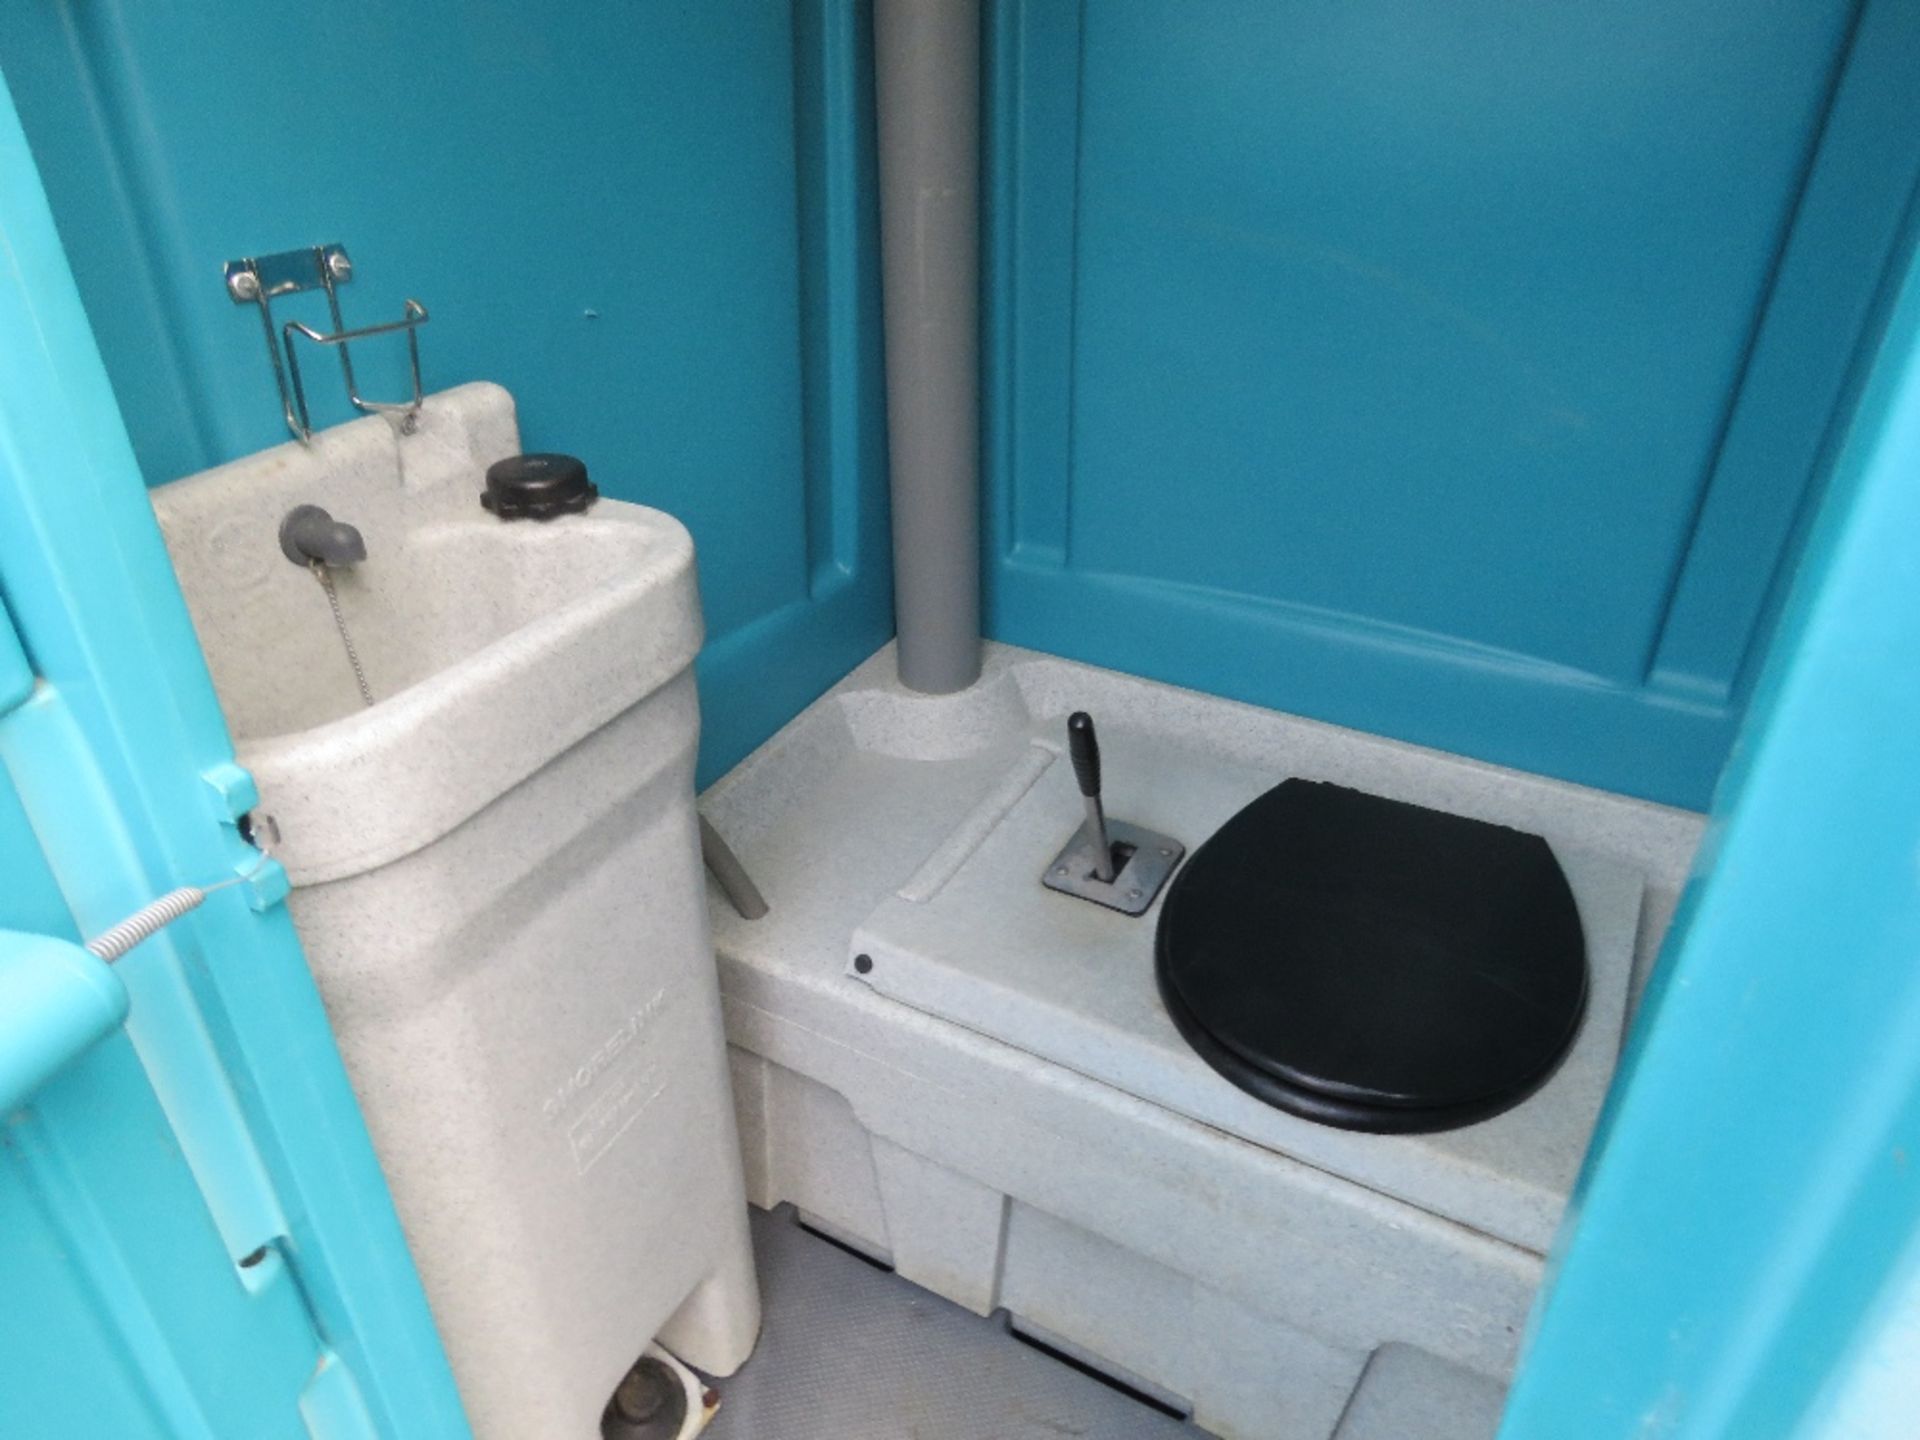 PORTABLE BUILDER'S / EVENT TOILET - Image 2 of 3